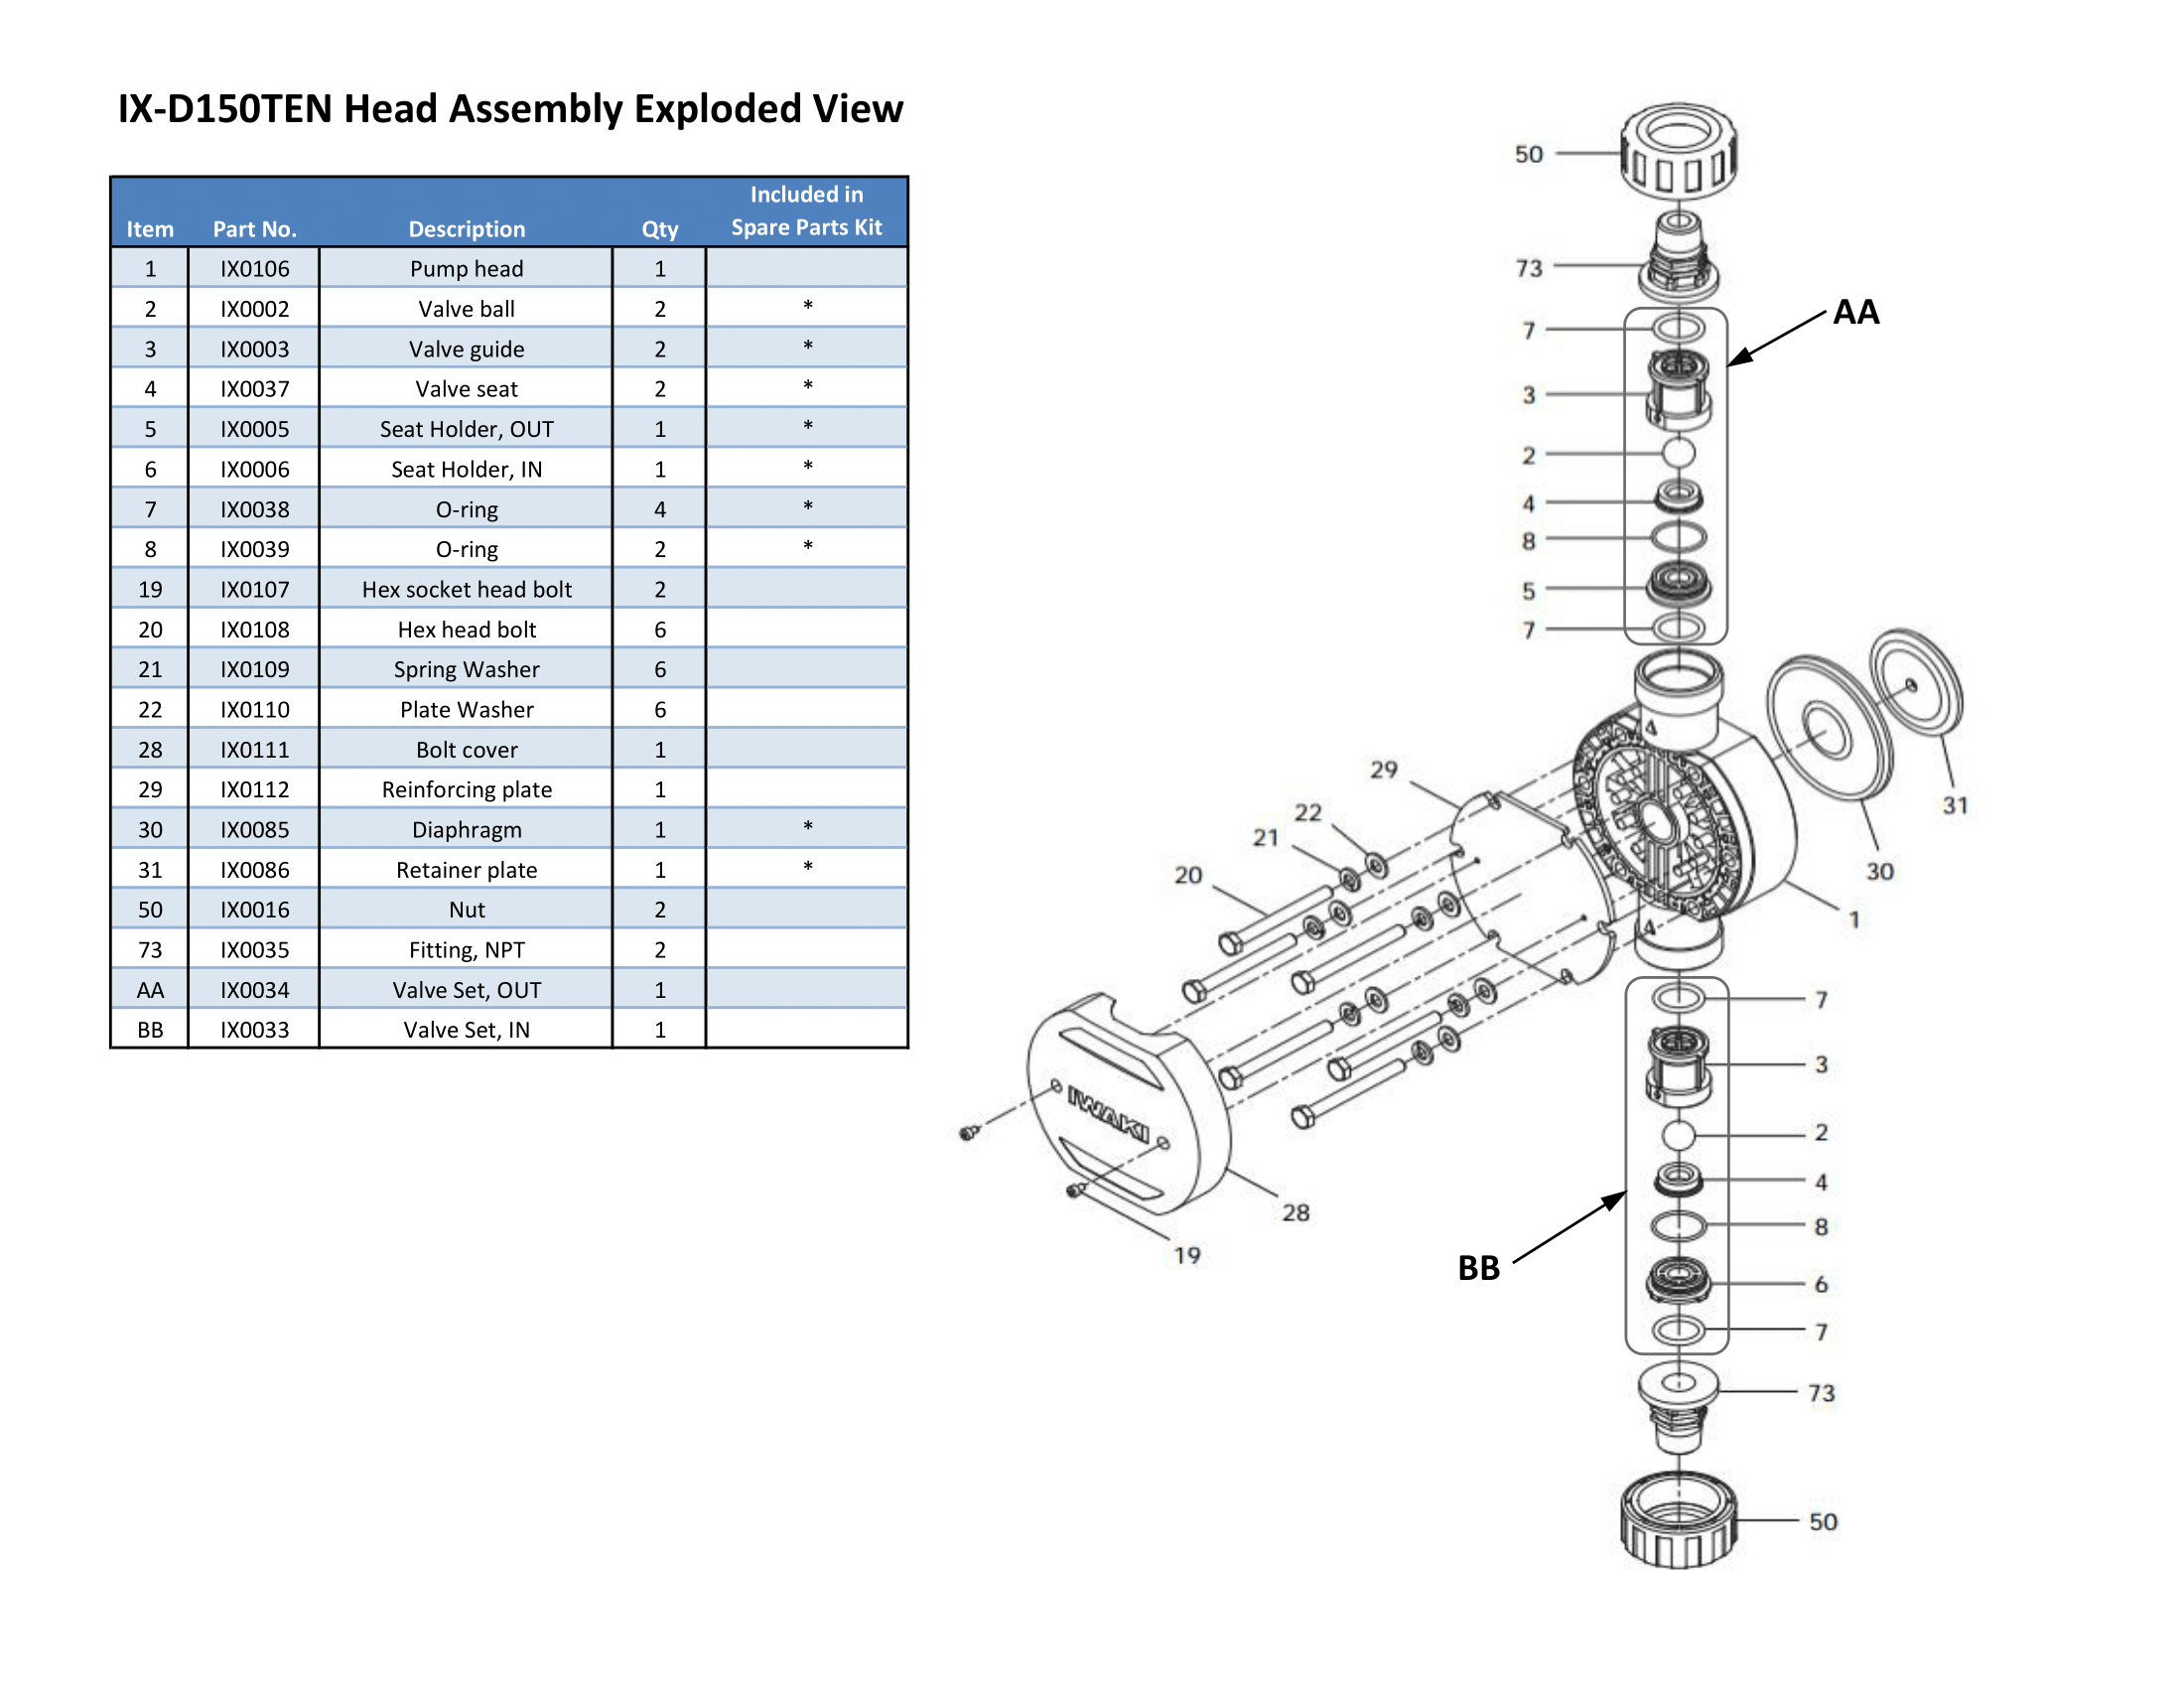 ix-d150ten-le-exploded-view-with-part-numbers-1.png